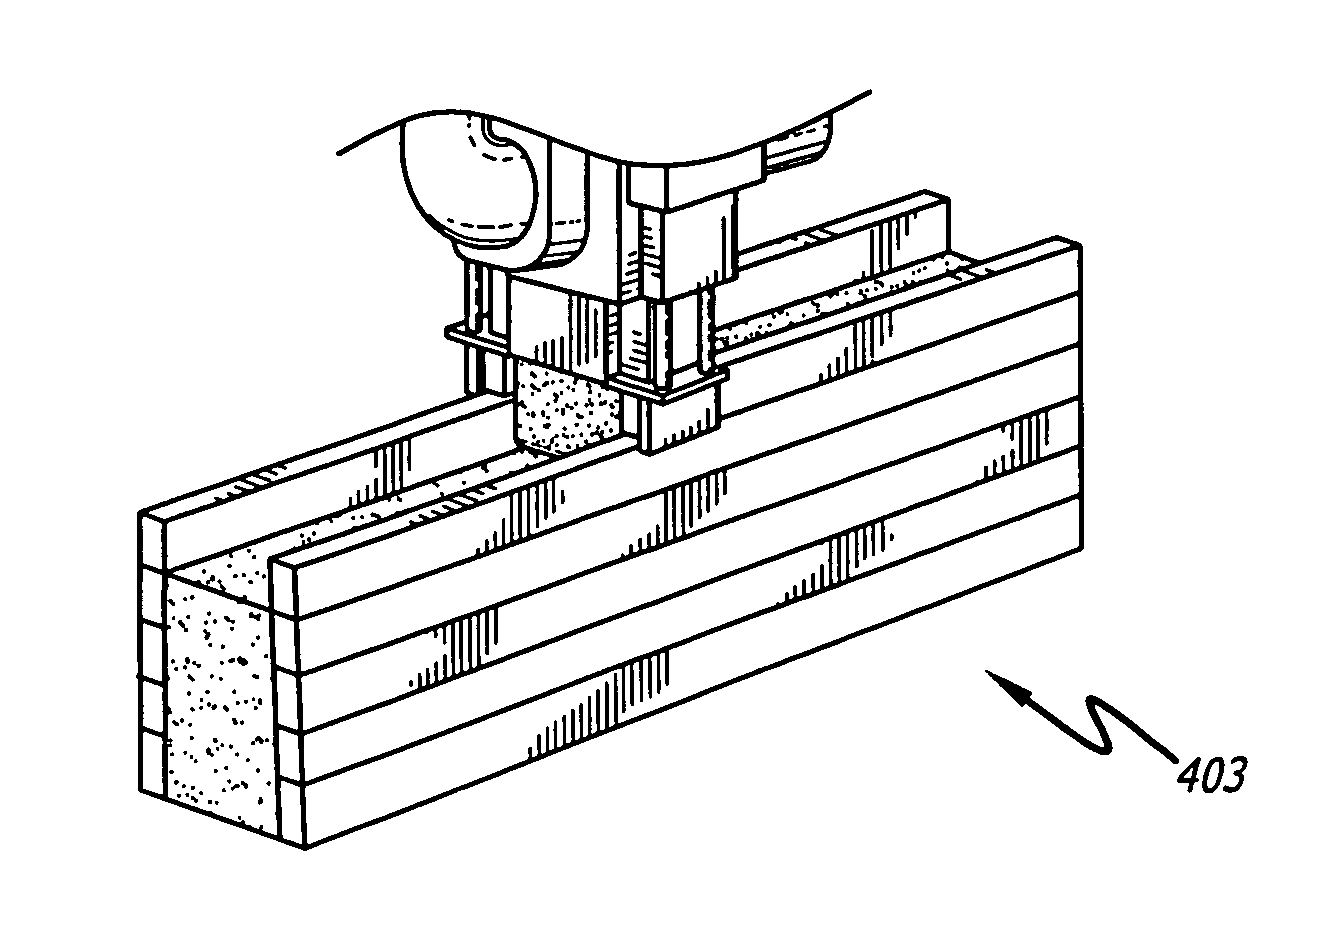 Multi-nozzle assembly for extrusion of wall